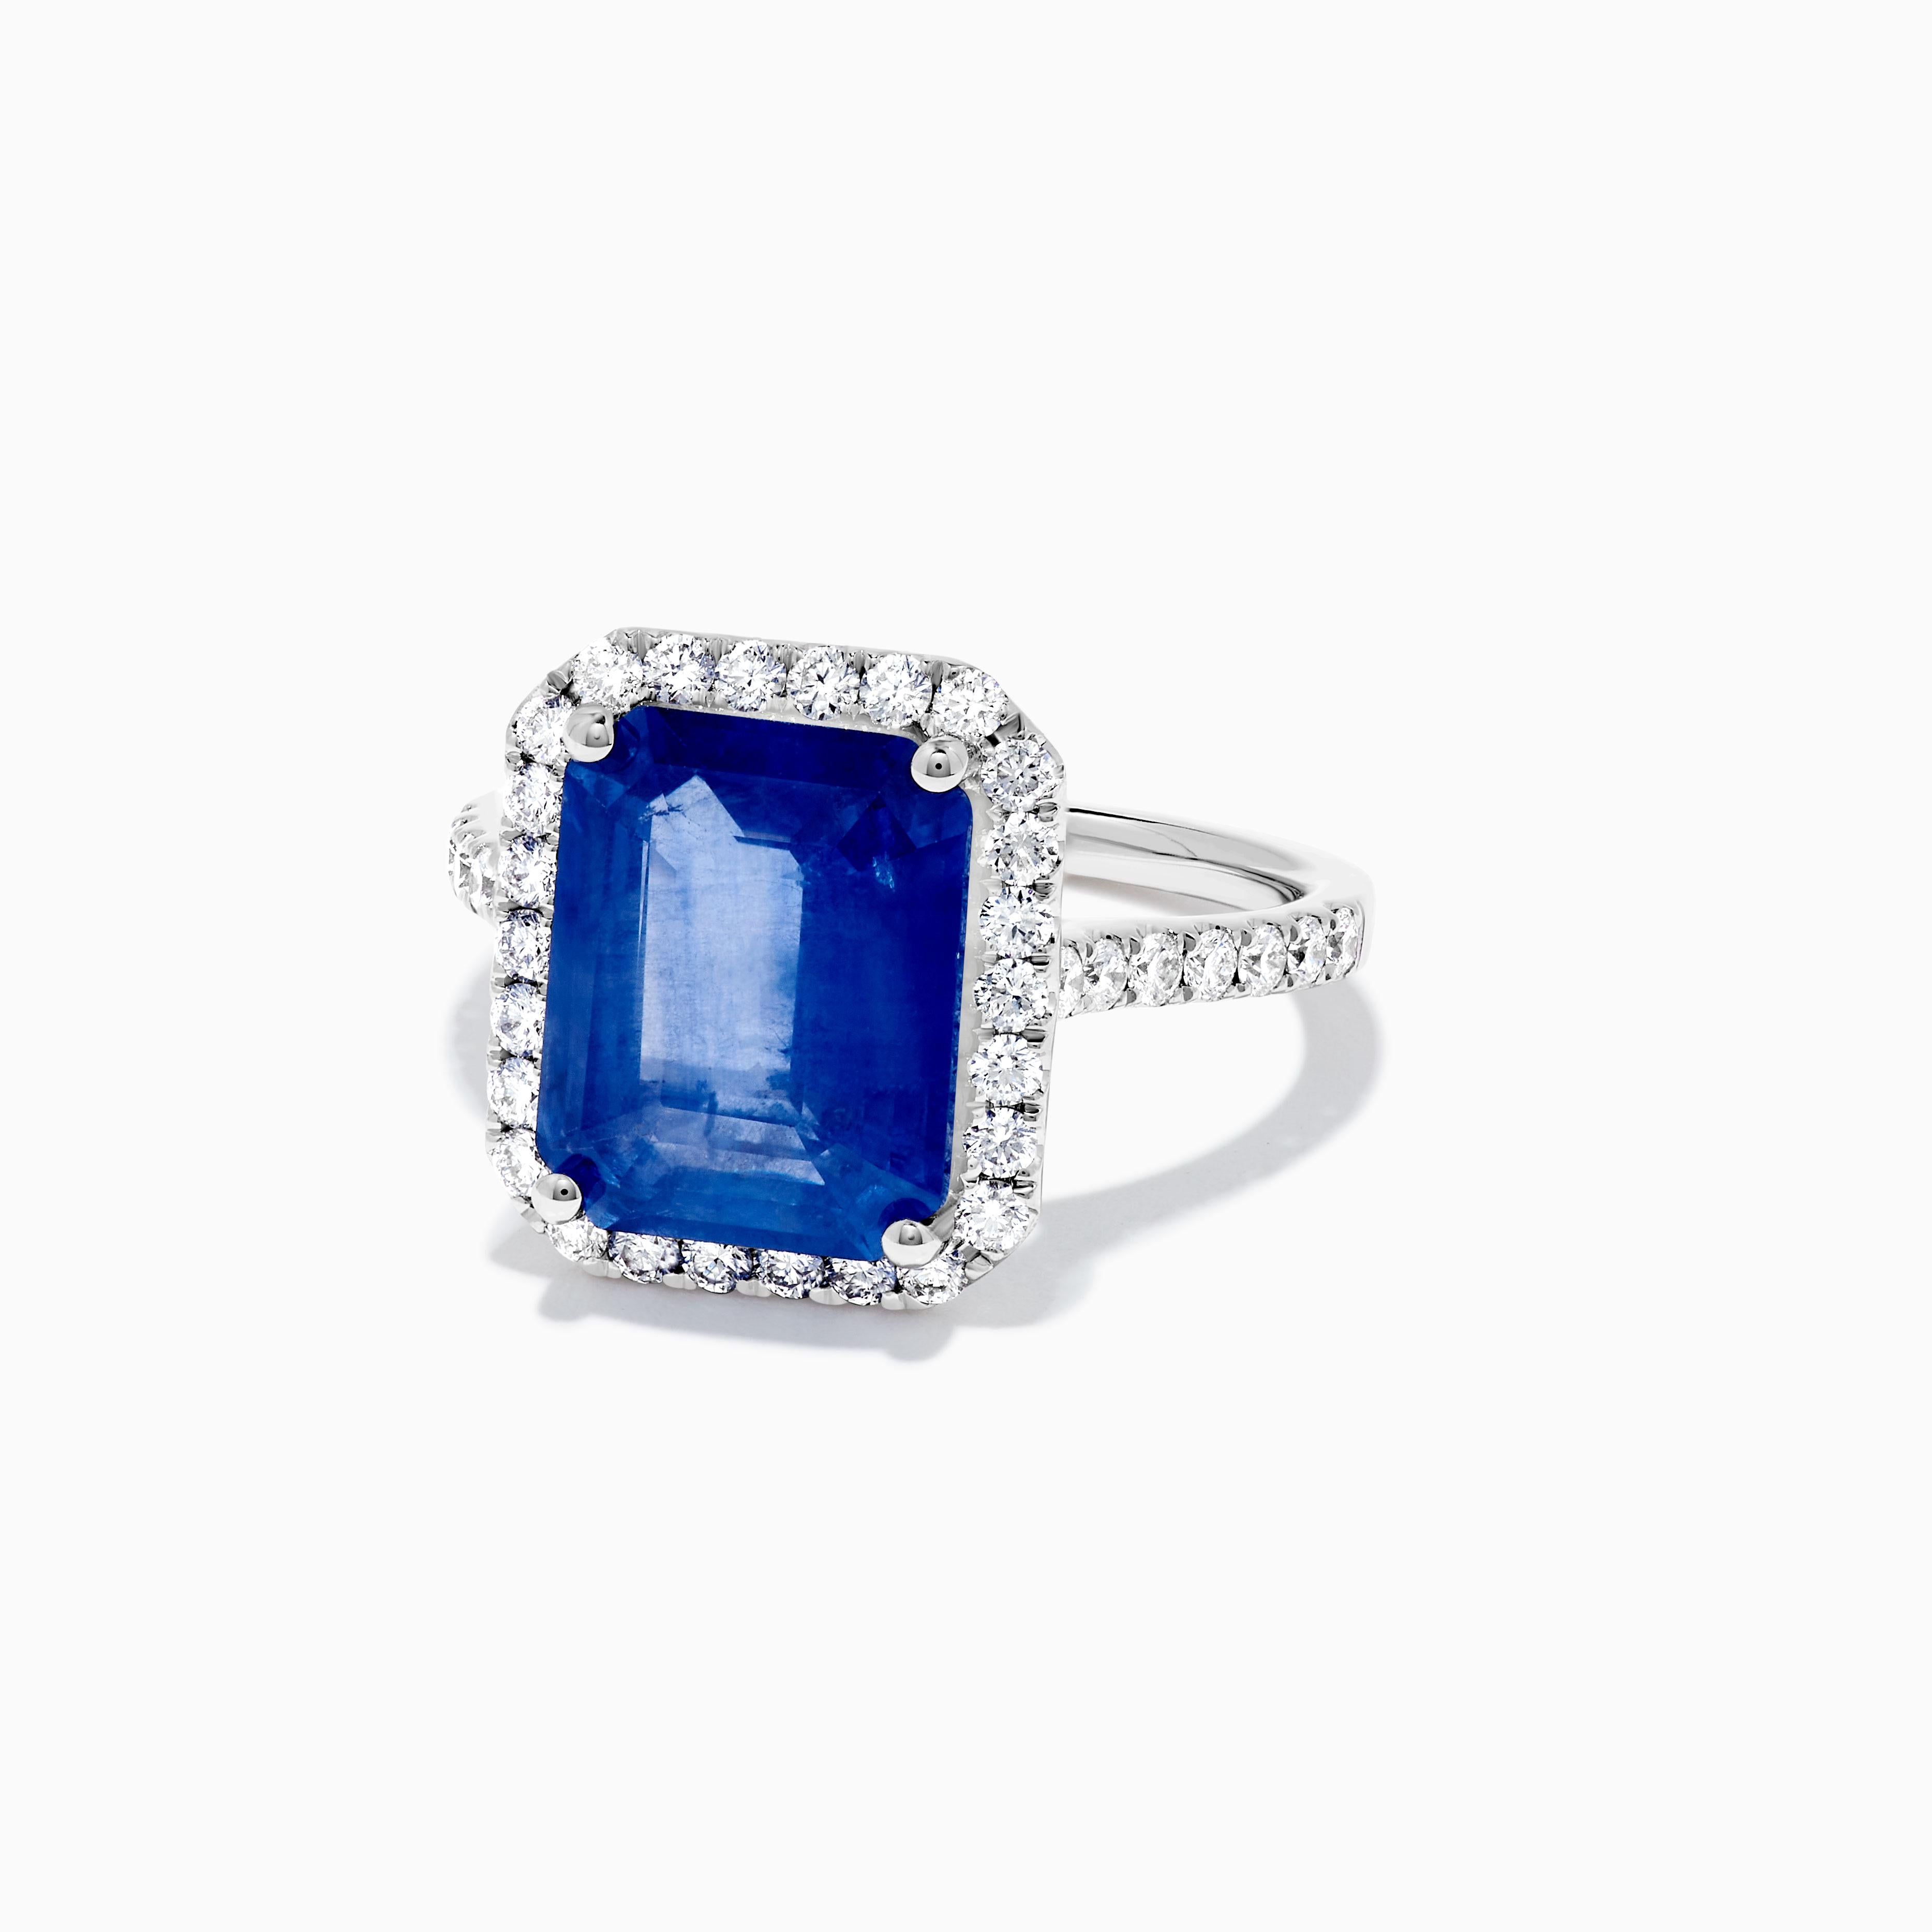 RareGemWorld's classic sapphire ring. Mounted in a beautiful 18K White Gold setting with a natural emerald cut blue sapphire. The sapphire is surrounded by natural round white diamond melee. This ring is guaranteed to impress and enhance your